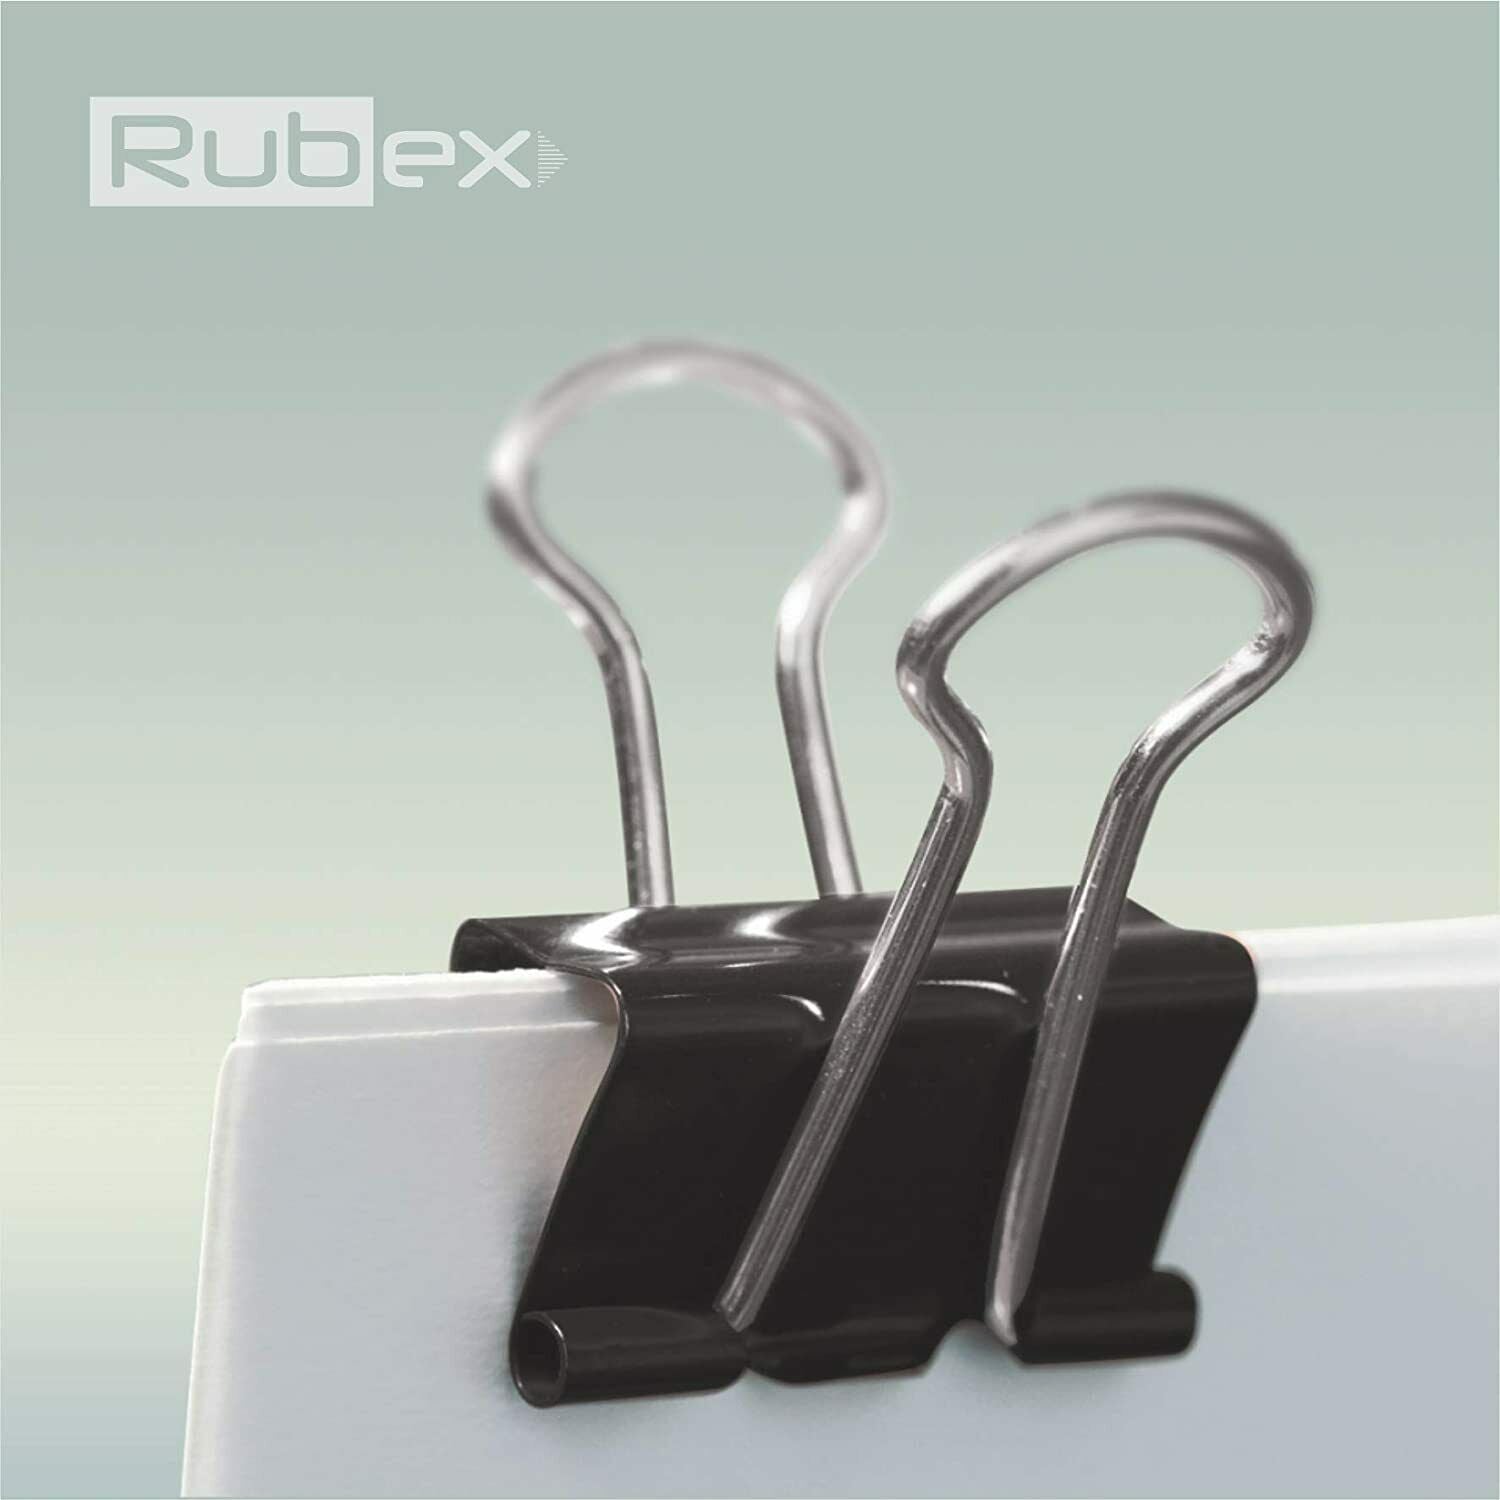 Rubex Binder Clips, Extra Large Binder Clips, Jumbo Binder Clips,2 Inch 36 Count